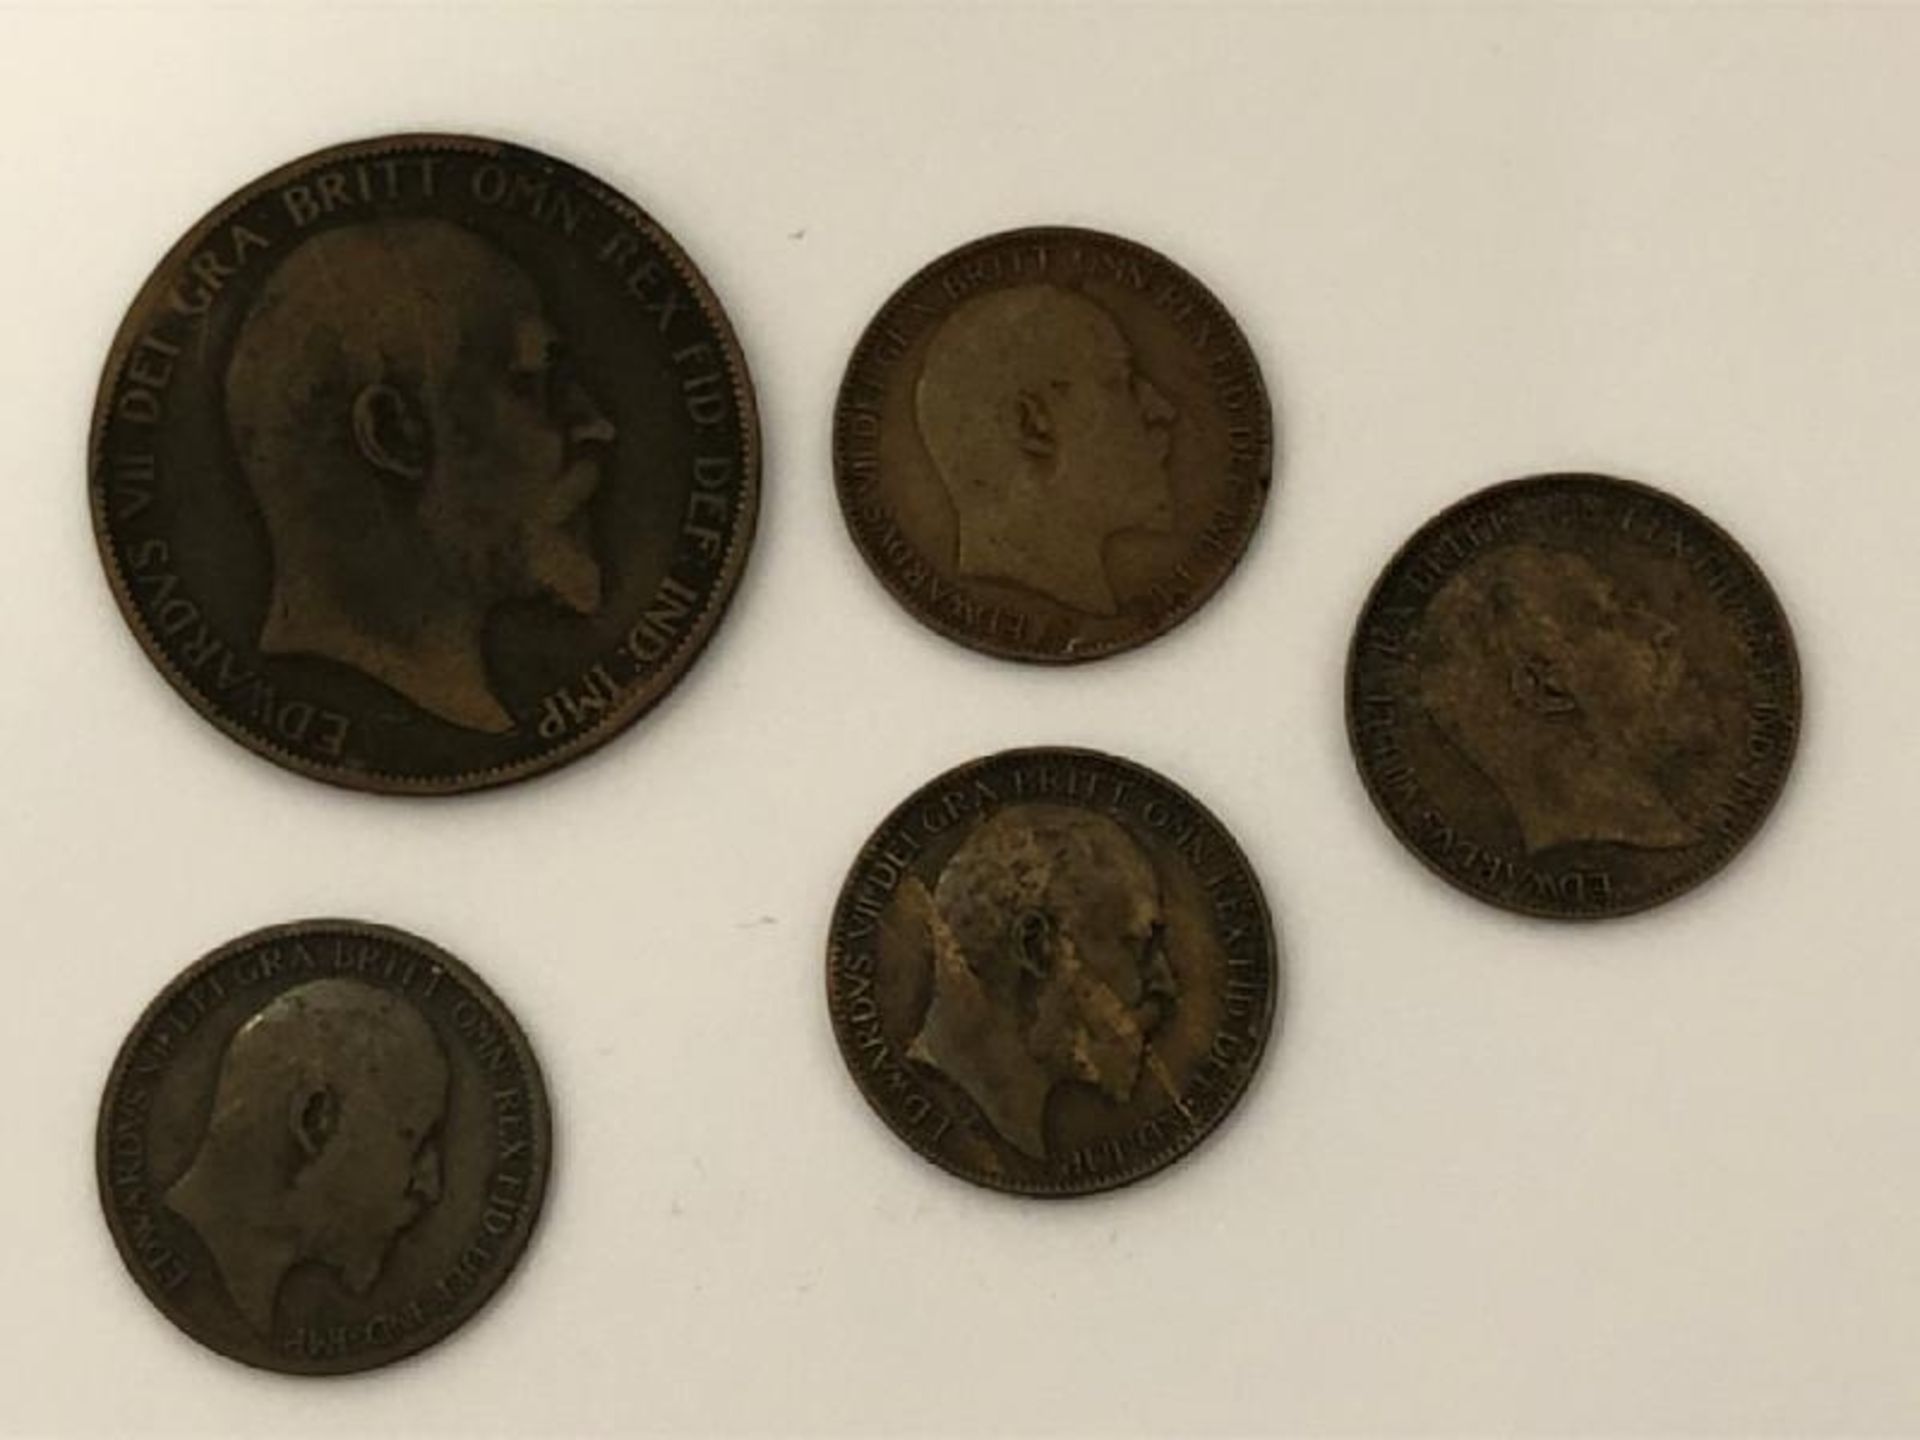 Five Queen Victoria coins dated 1840, 1879, 1862, 1898 and 1900 with five Edward VII coins / AN9 - Image 4 of 7